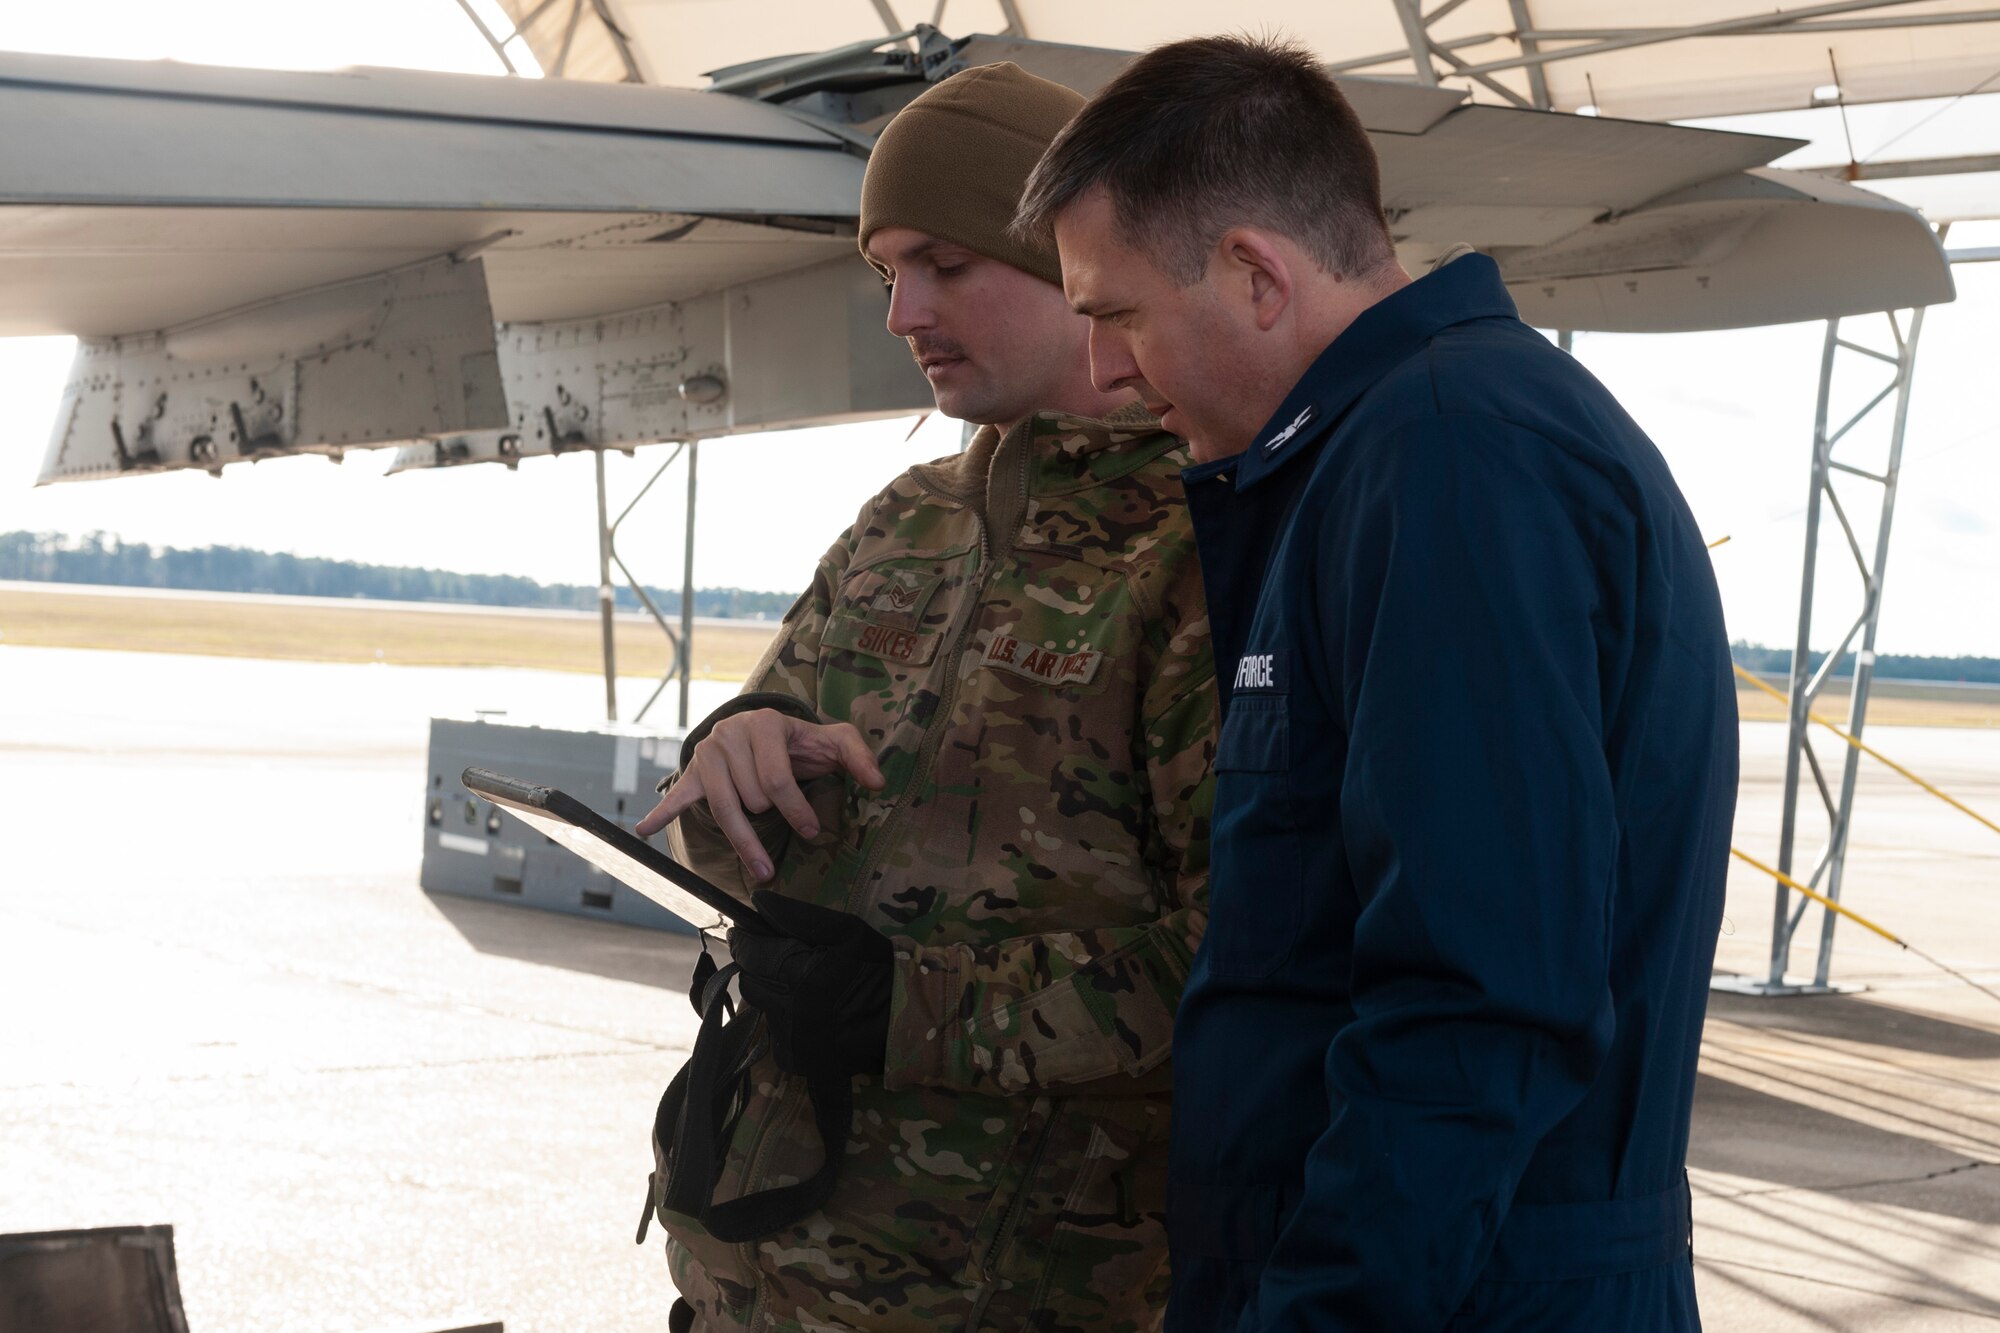 Photo of Airman explaining a technical order to Col. Walls